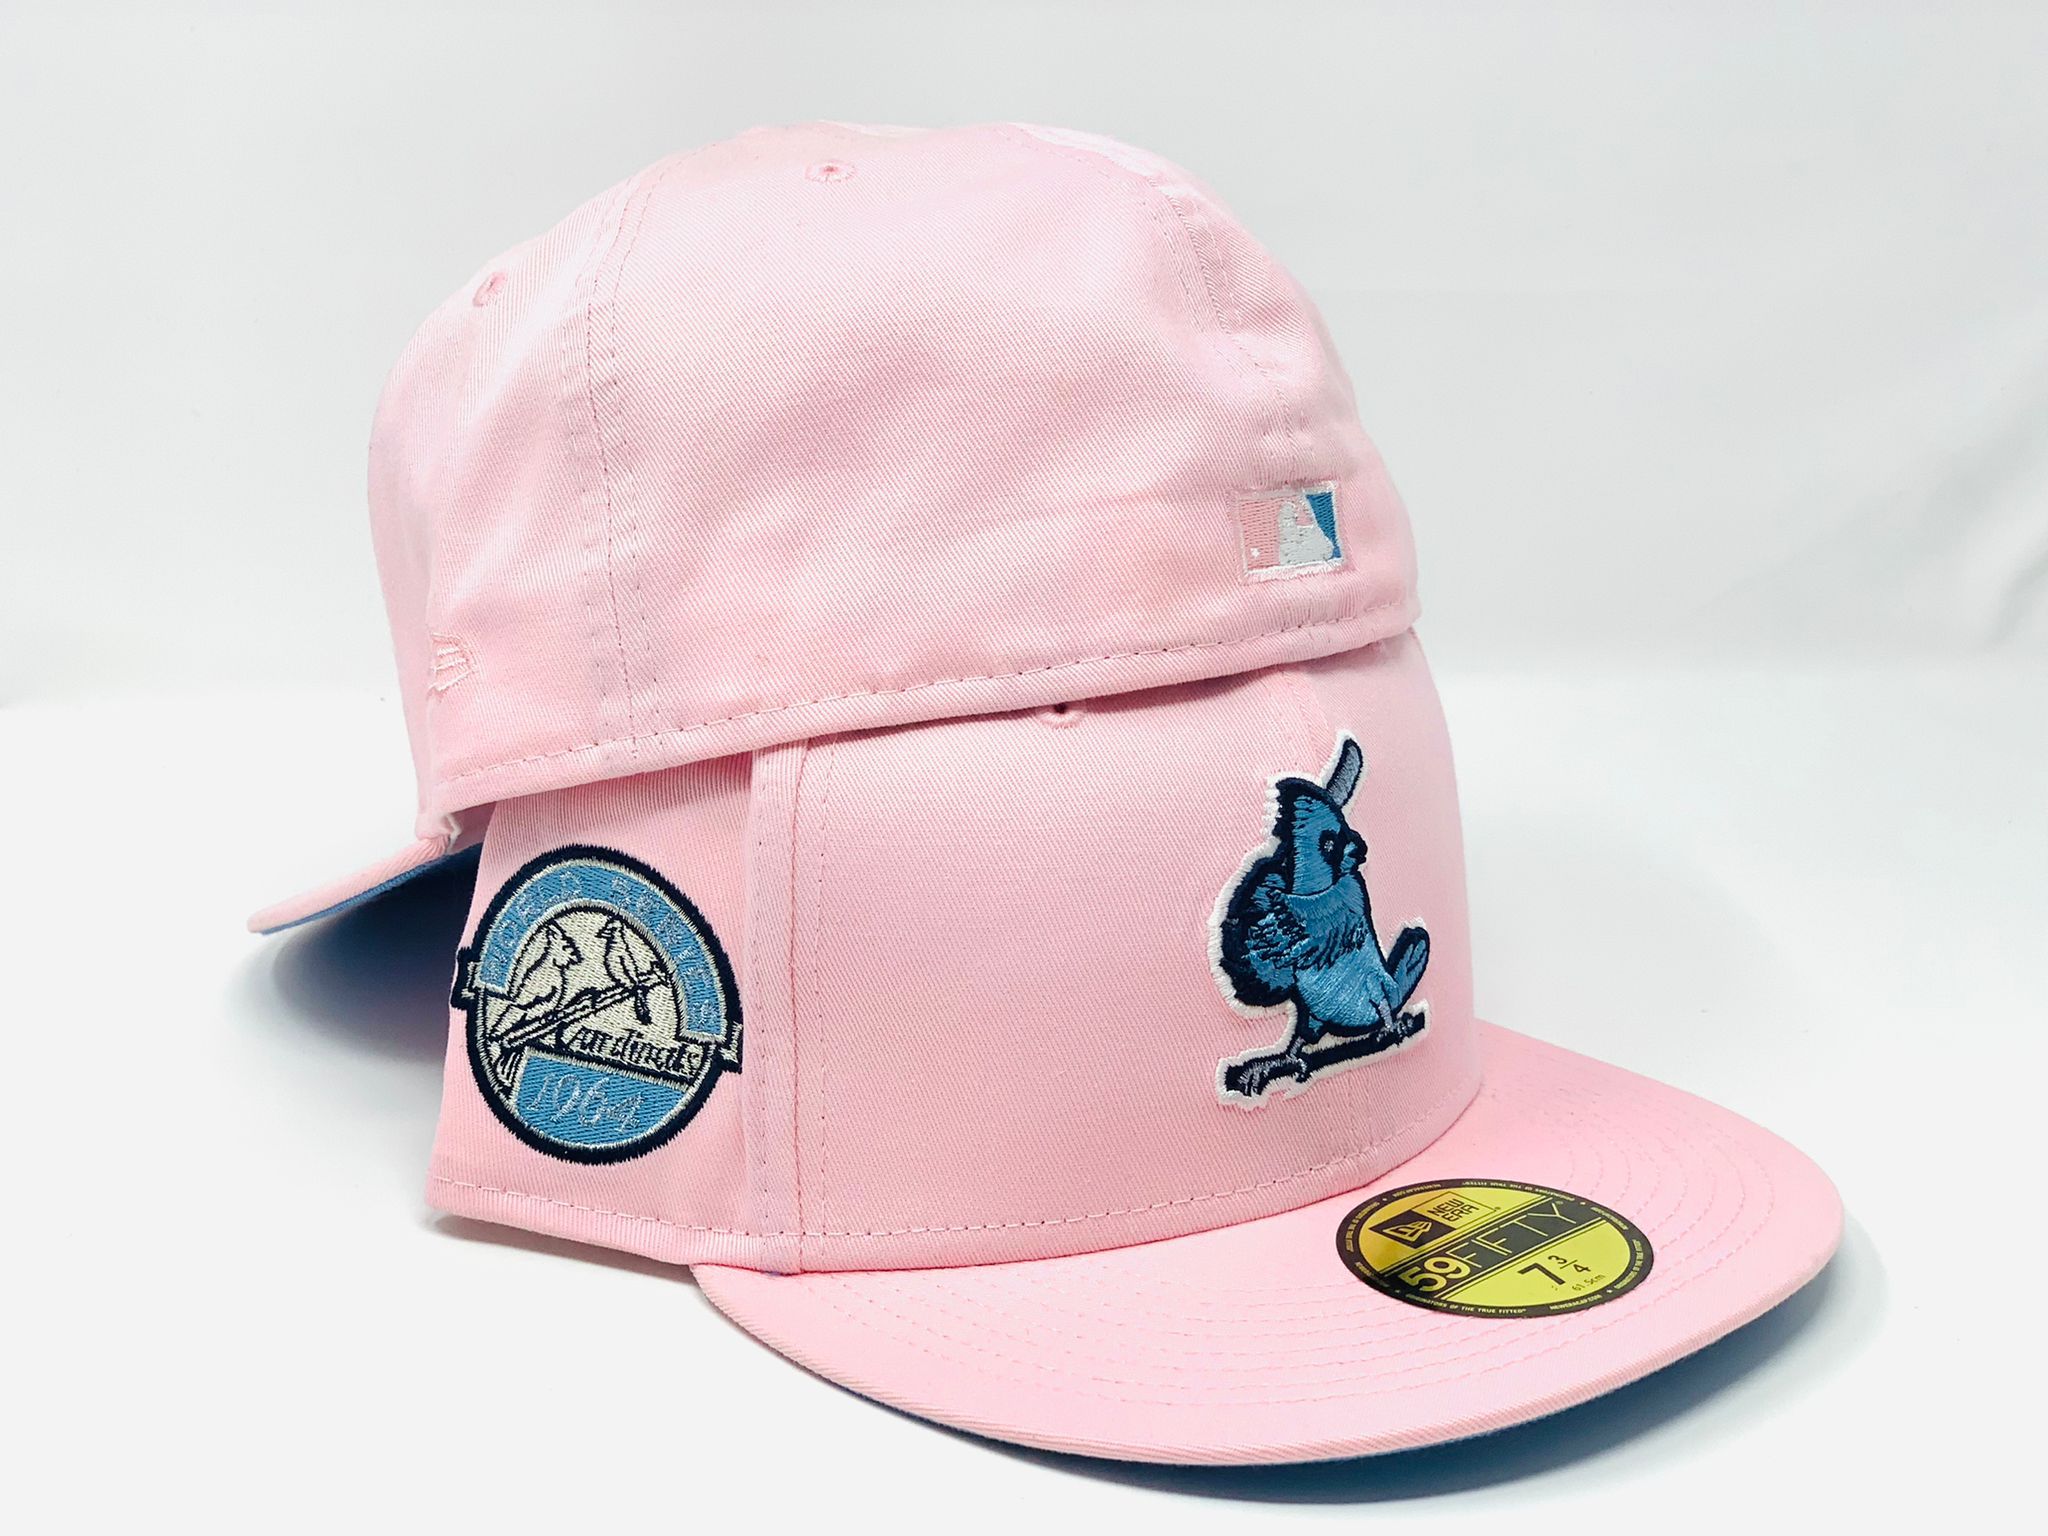 Lids St. Louis Cardinals New Era Flamingo 59FIFTY Fitted Hat - White/Pink